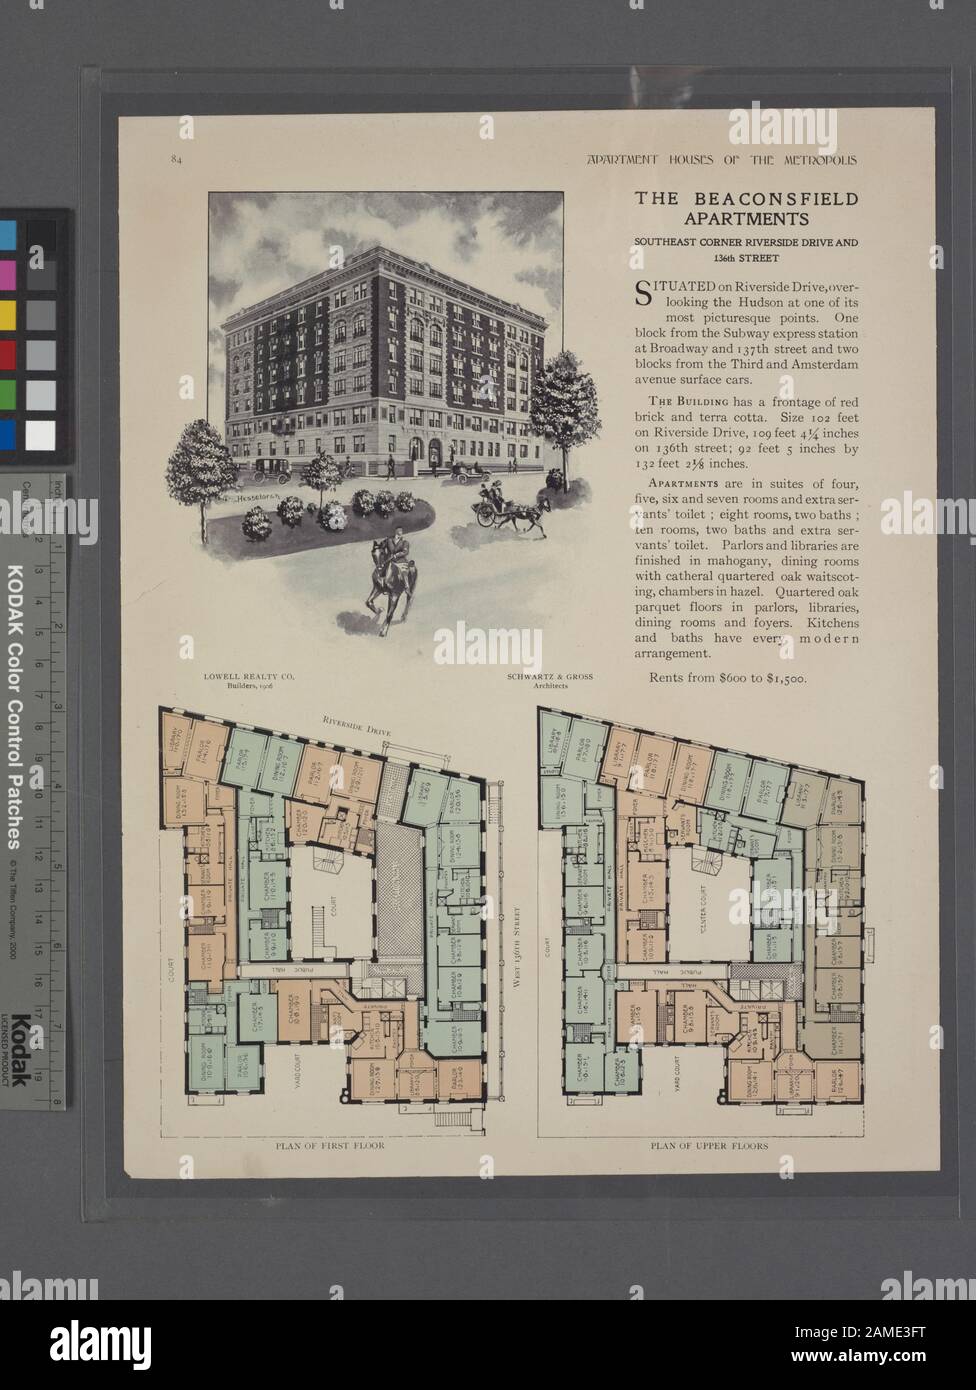 The Beaconsfield Apartments, southeast corner Riverside Drive and 136th Street; Plan of first floor; Plan of upper floors  Includes index. Lowell Realty Co., Builders, 1906 / Architects - Schwartz & Gross; The Beaconsfield Apartments, southeast corner Riverside Drive and 136th Street; Plan of first floor; Plan of upper floors. Stock Photo